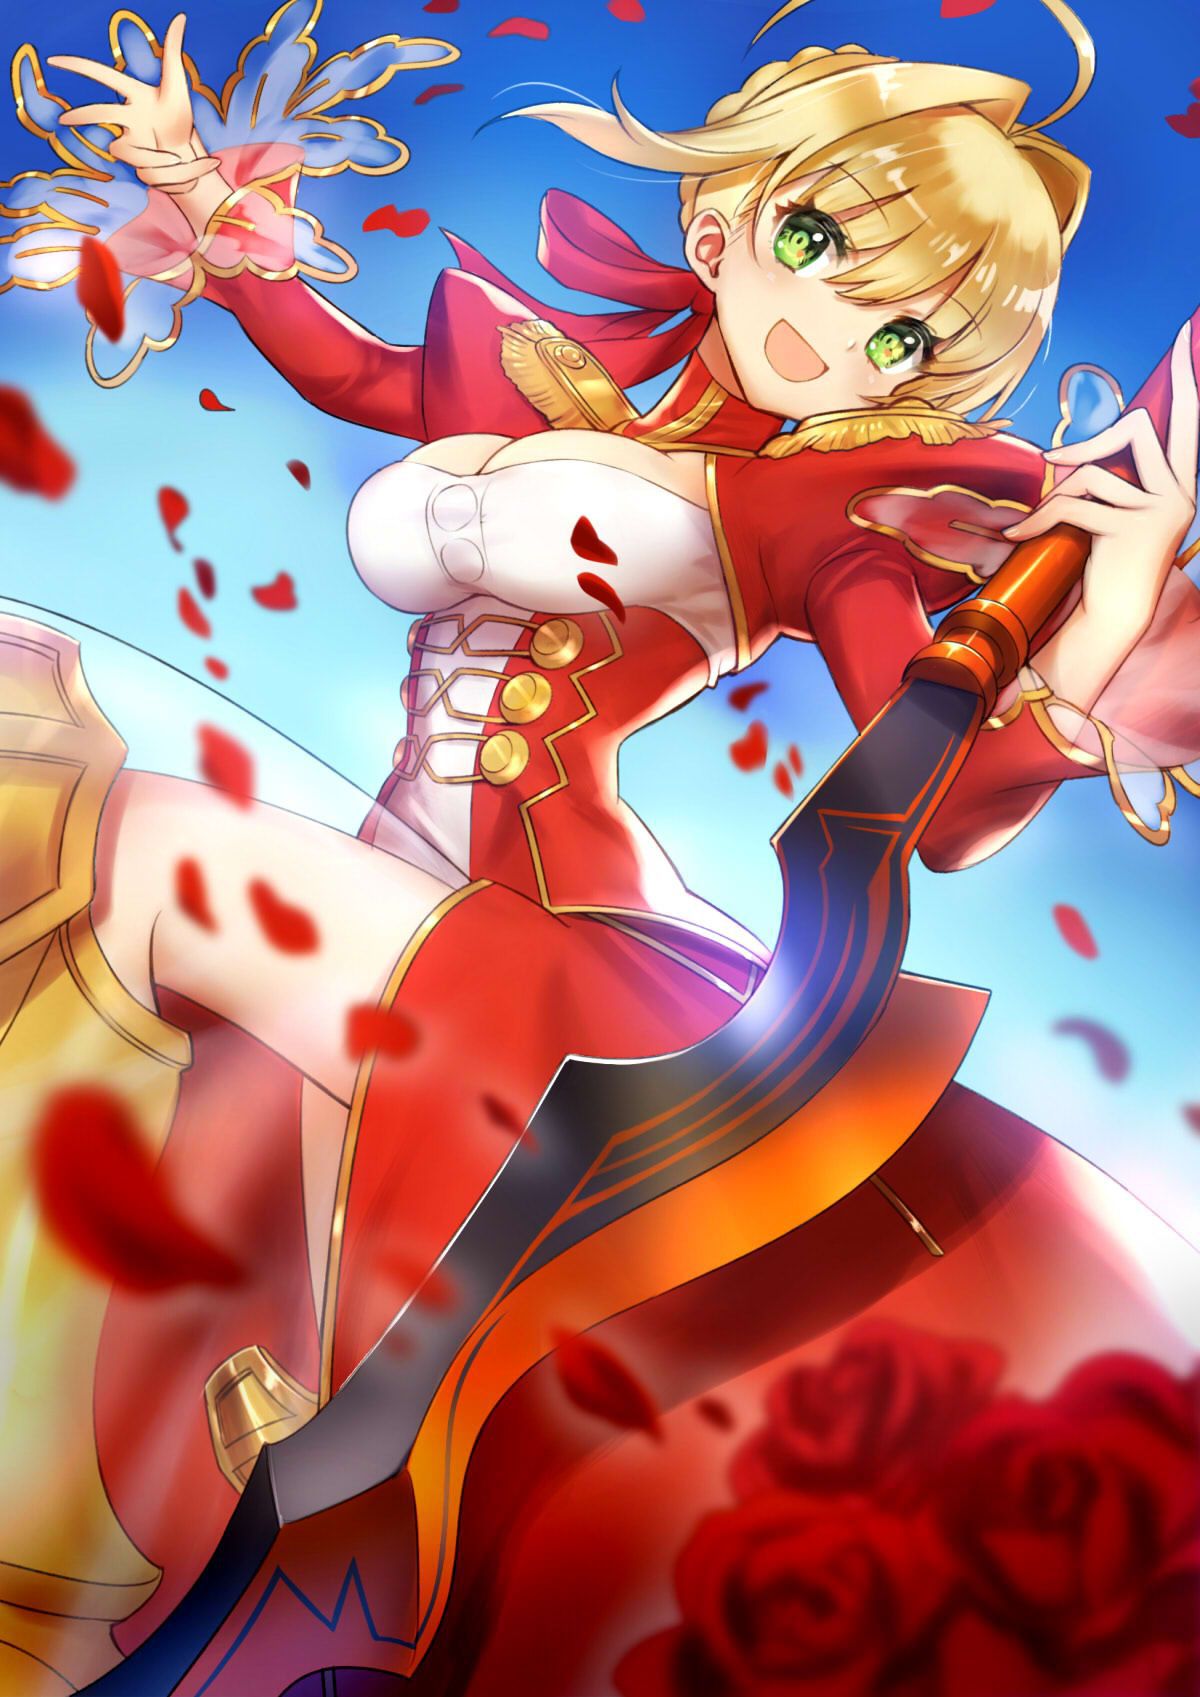 [Secondary ZIP] is about to start anime 100 pieces of cute image summary of Nero Claudius so soon 37